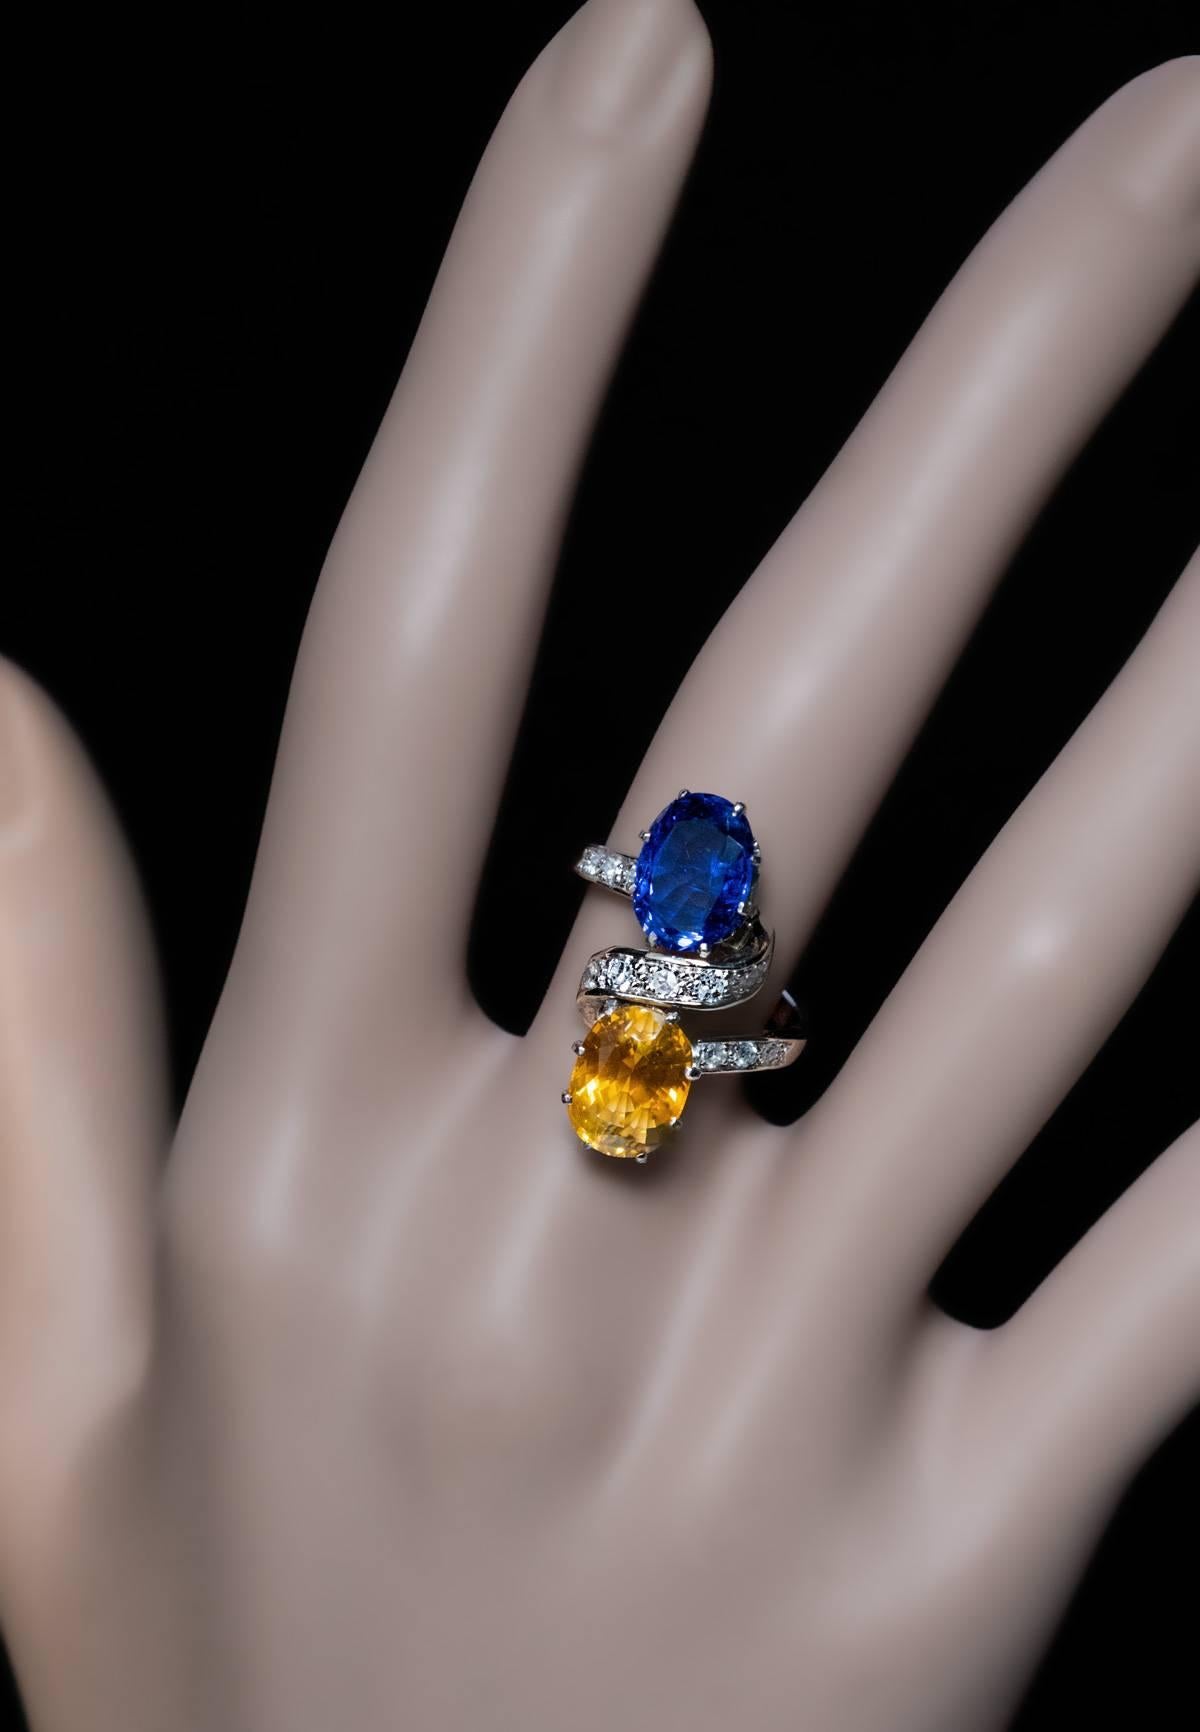 Circa 1950
A vintage French platinum and white 18K gold ring features royal blue and tangerine orange oval sapphires accented by a diamond-set stylized ribbon.
The blue sapphire measures 10 x 7.5 x 4.15 mm, approximately 2.49 ct; the orange sapphire